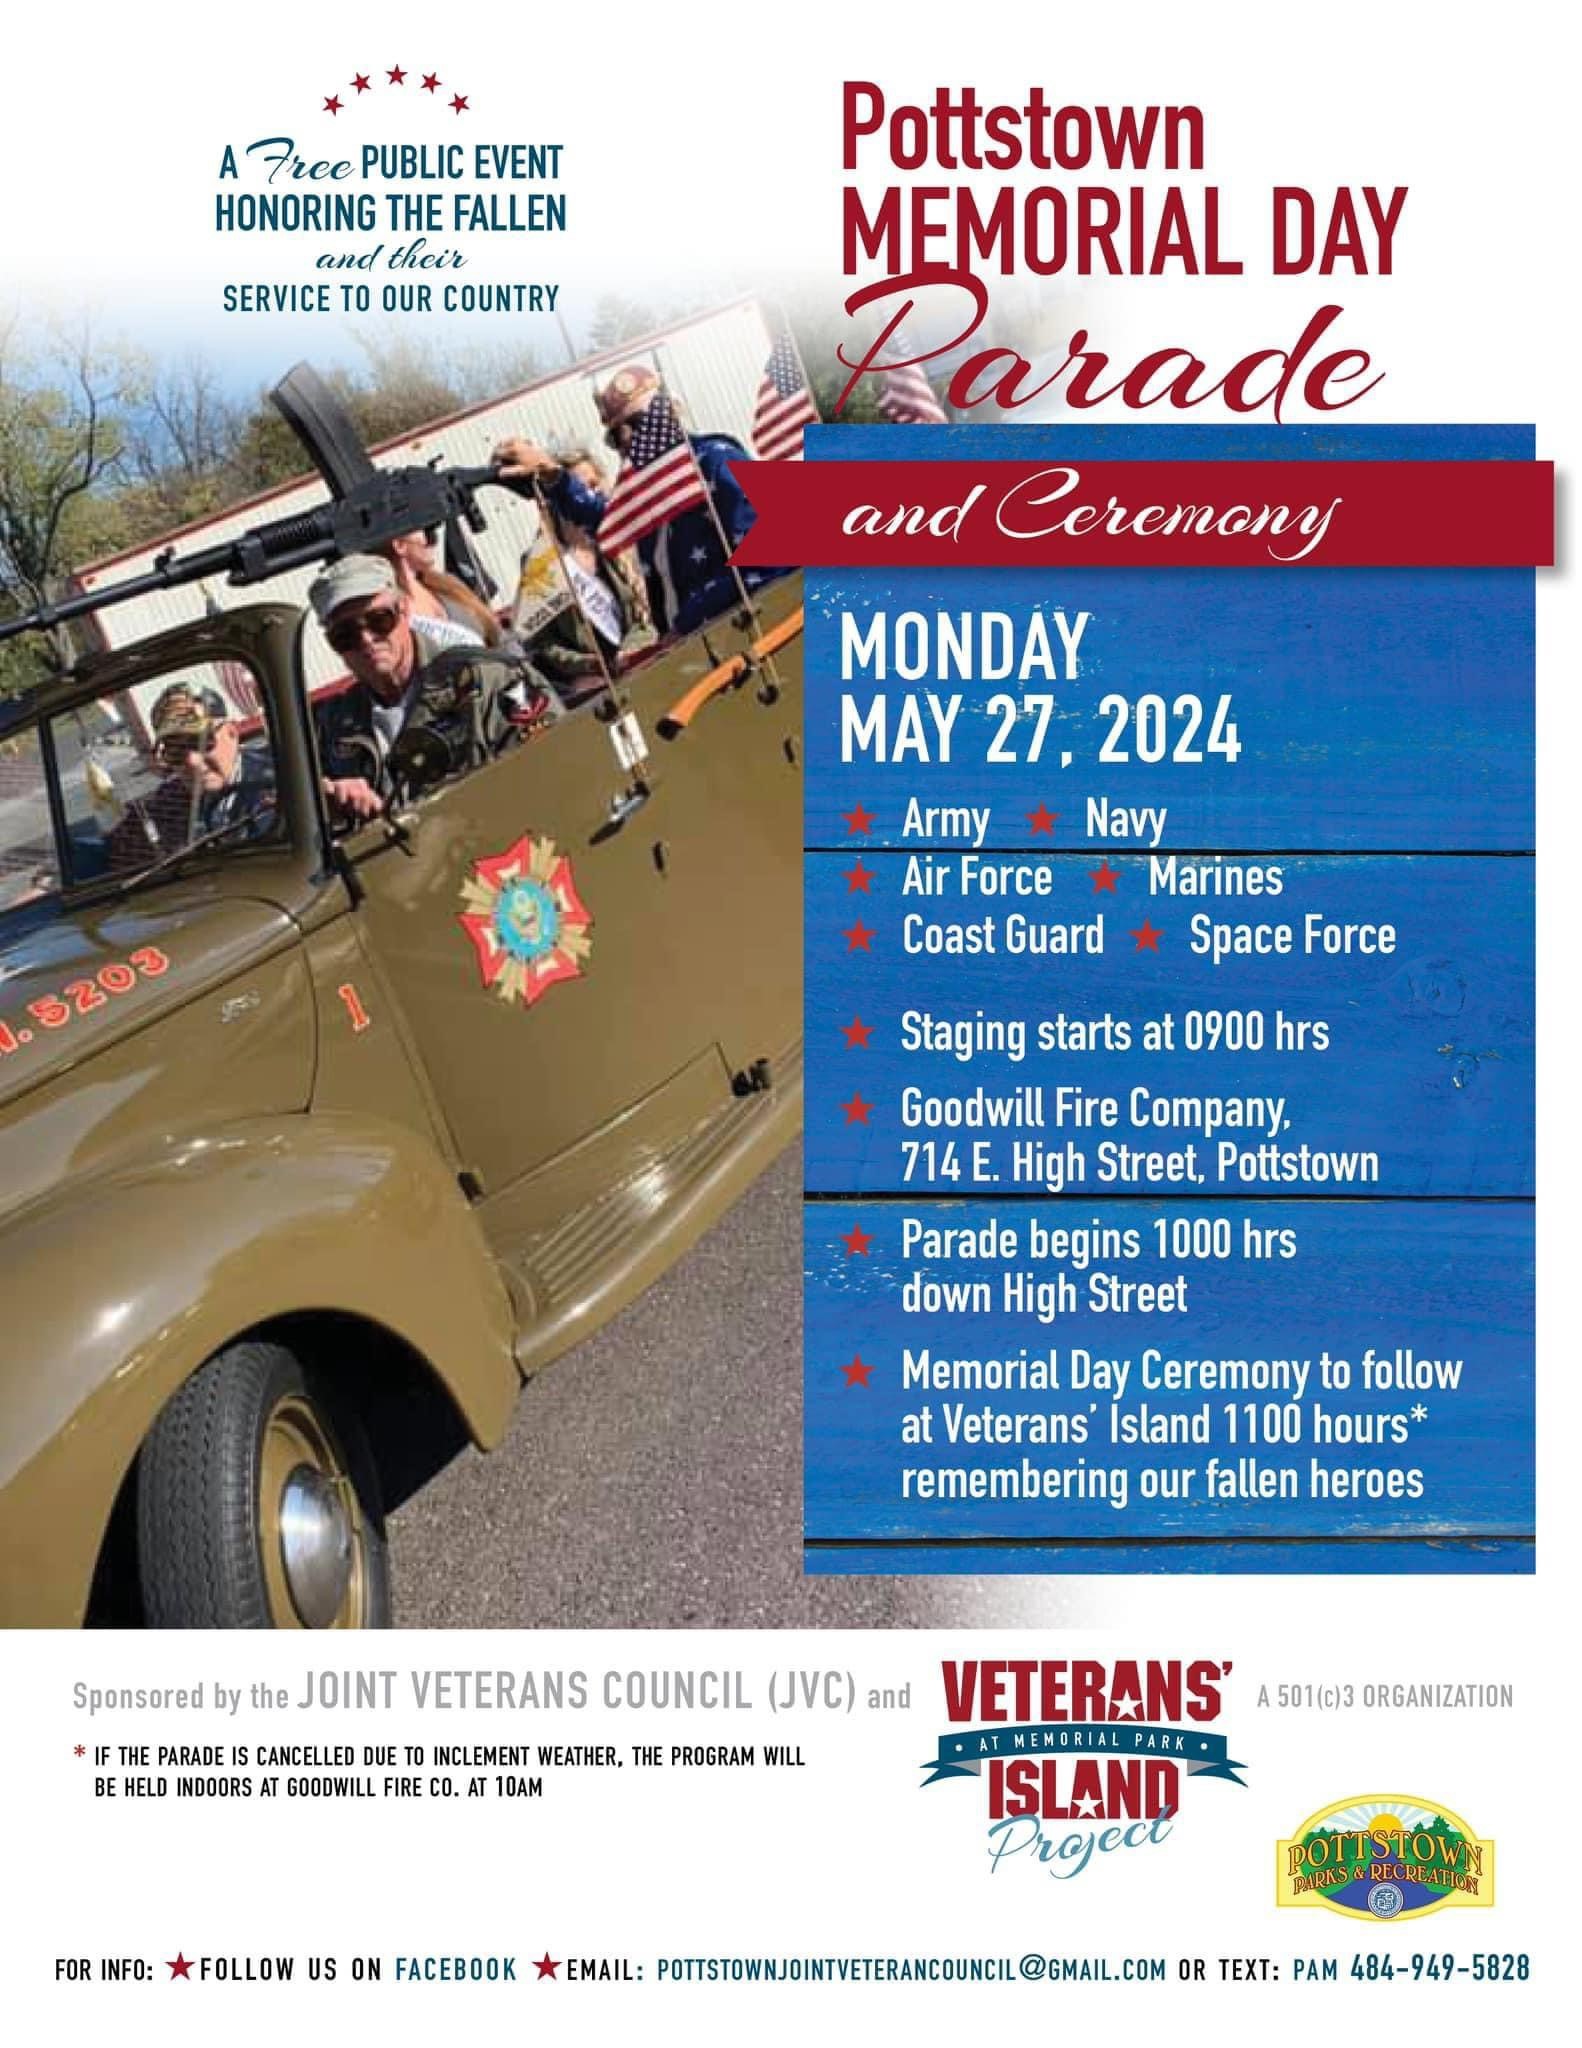 Pottstown Memorial Day Parade, Ceremony Set for Monday